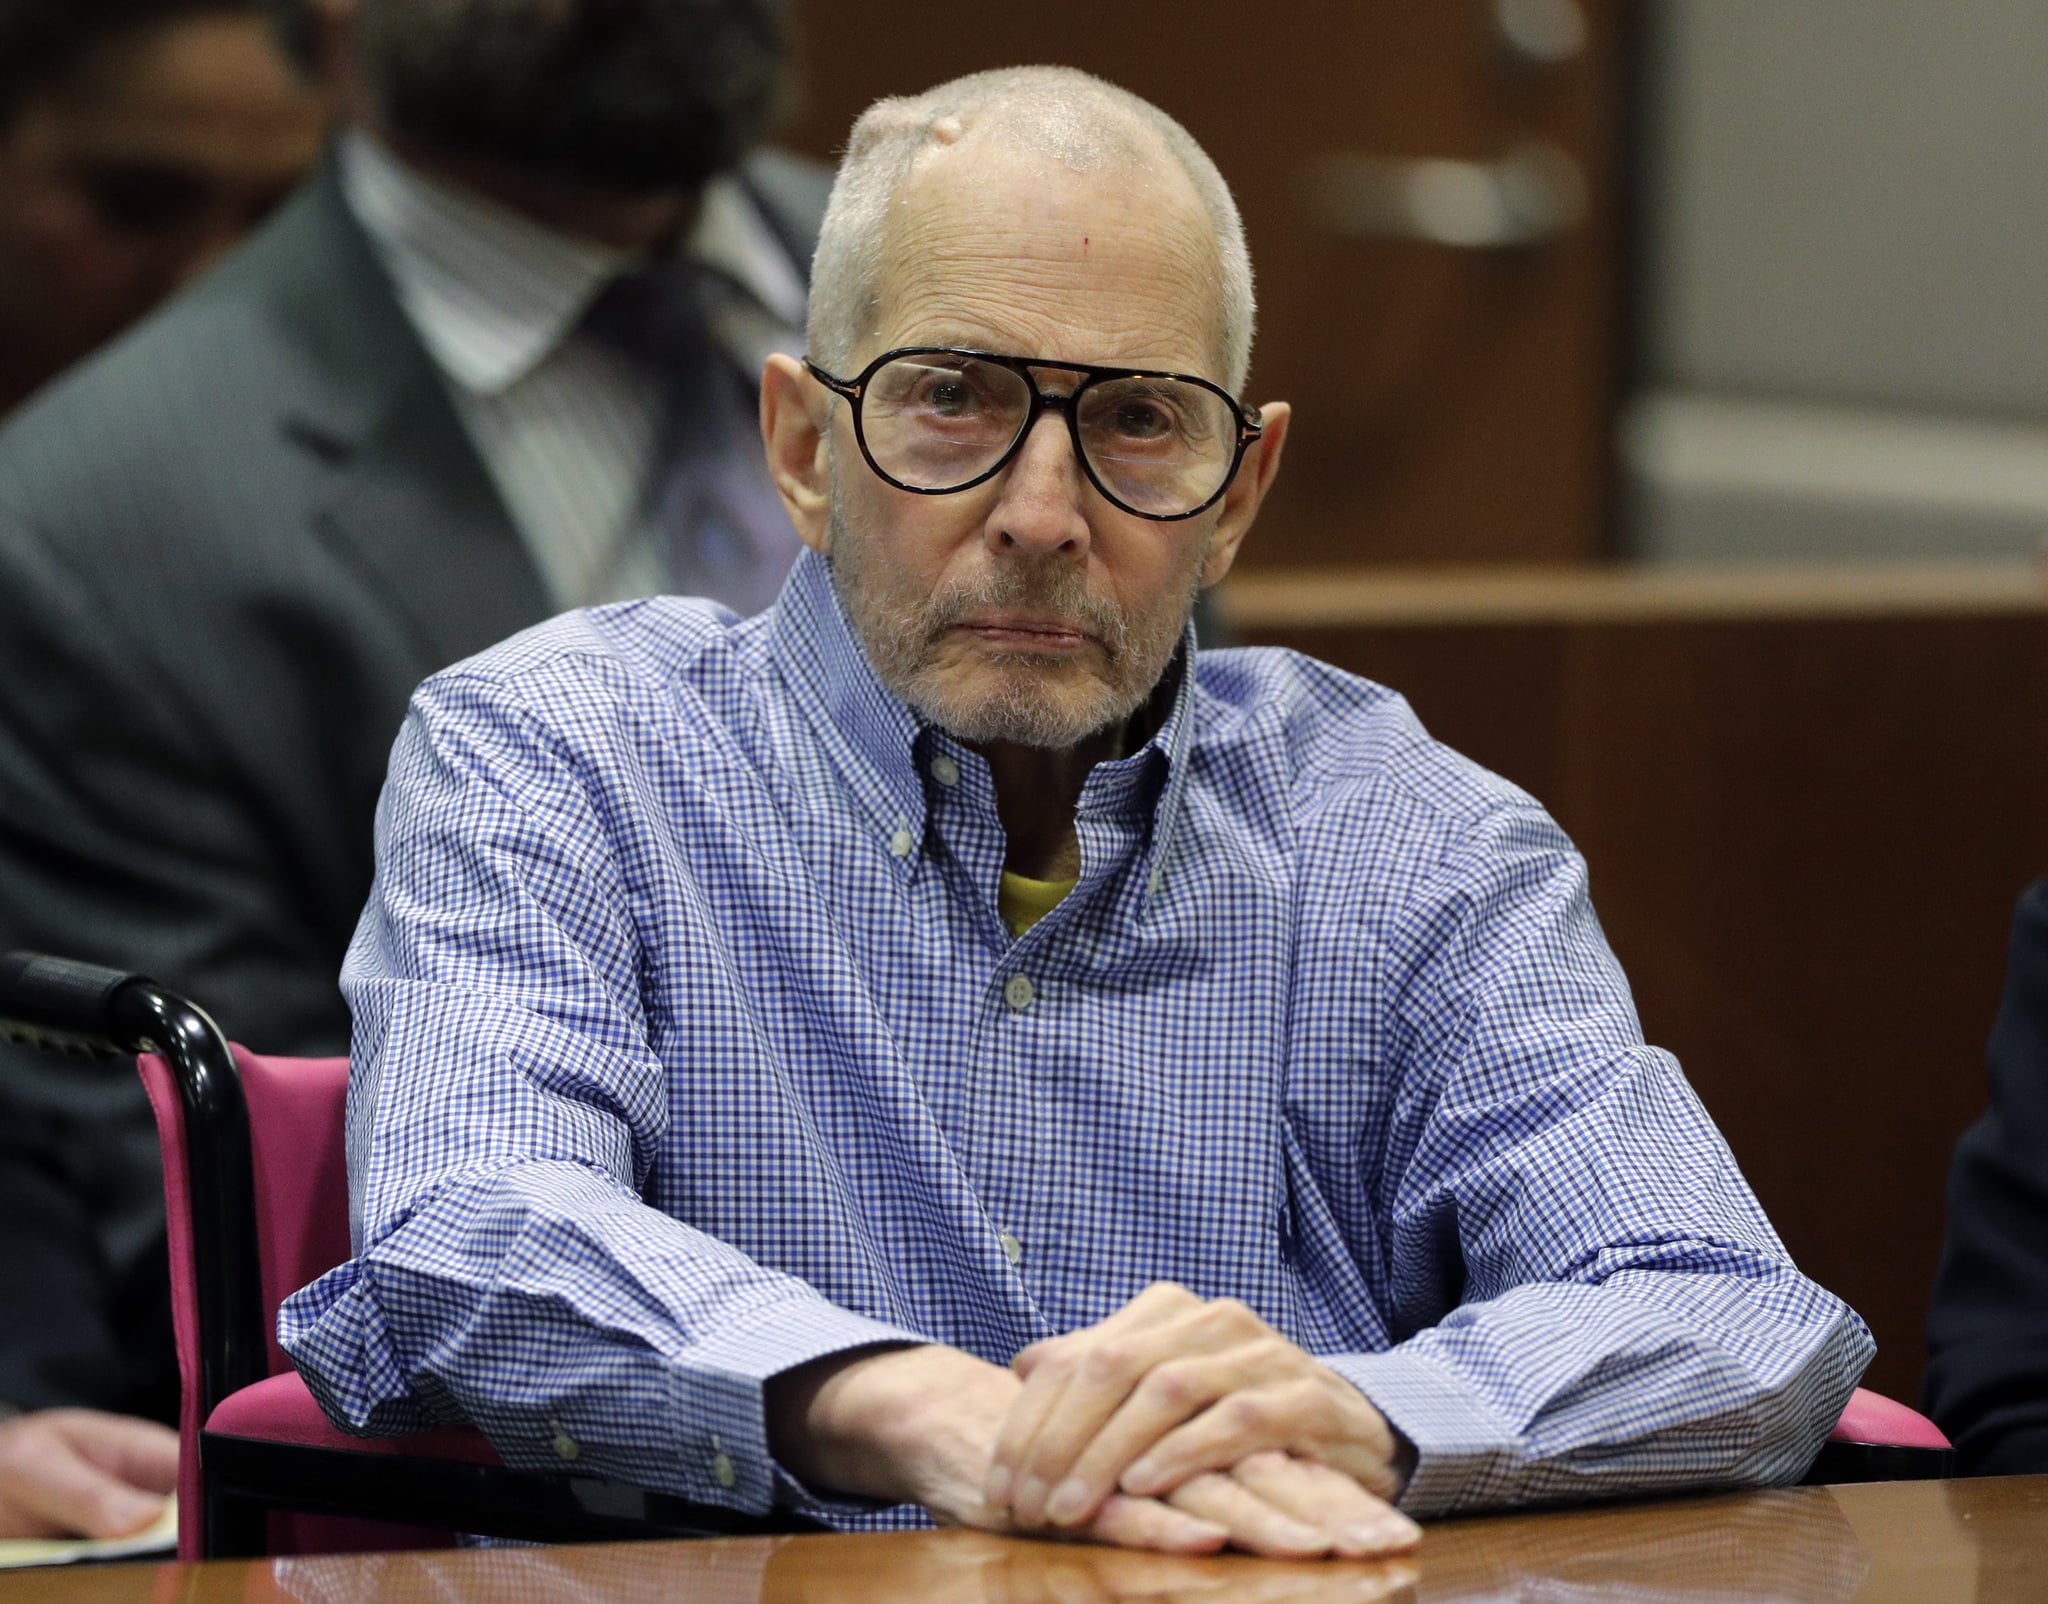 LOS ANGELES, CA - DECEMBER 21: Real Estate Heir Robert Durst appears in the Airport Branch of the Los Angeles County Superior Court during a preliminary hearing on December 21, 2016 in Los Angeles, California. Durst is charged with capital murder in a friend's killing Susan Berman in 2000. (Photo by Jae C. Hong-Pool\Getty Images)